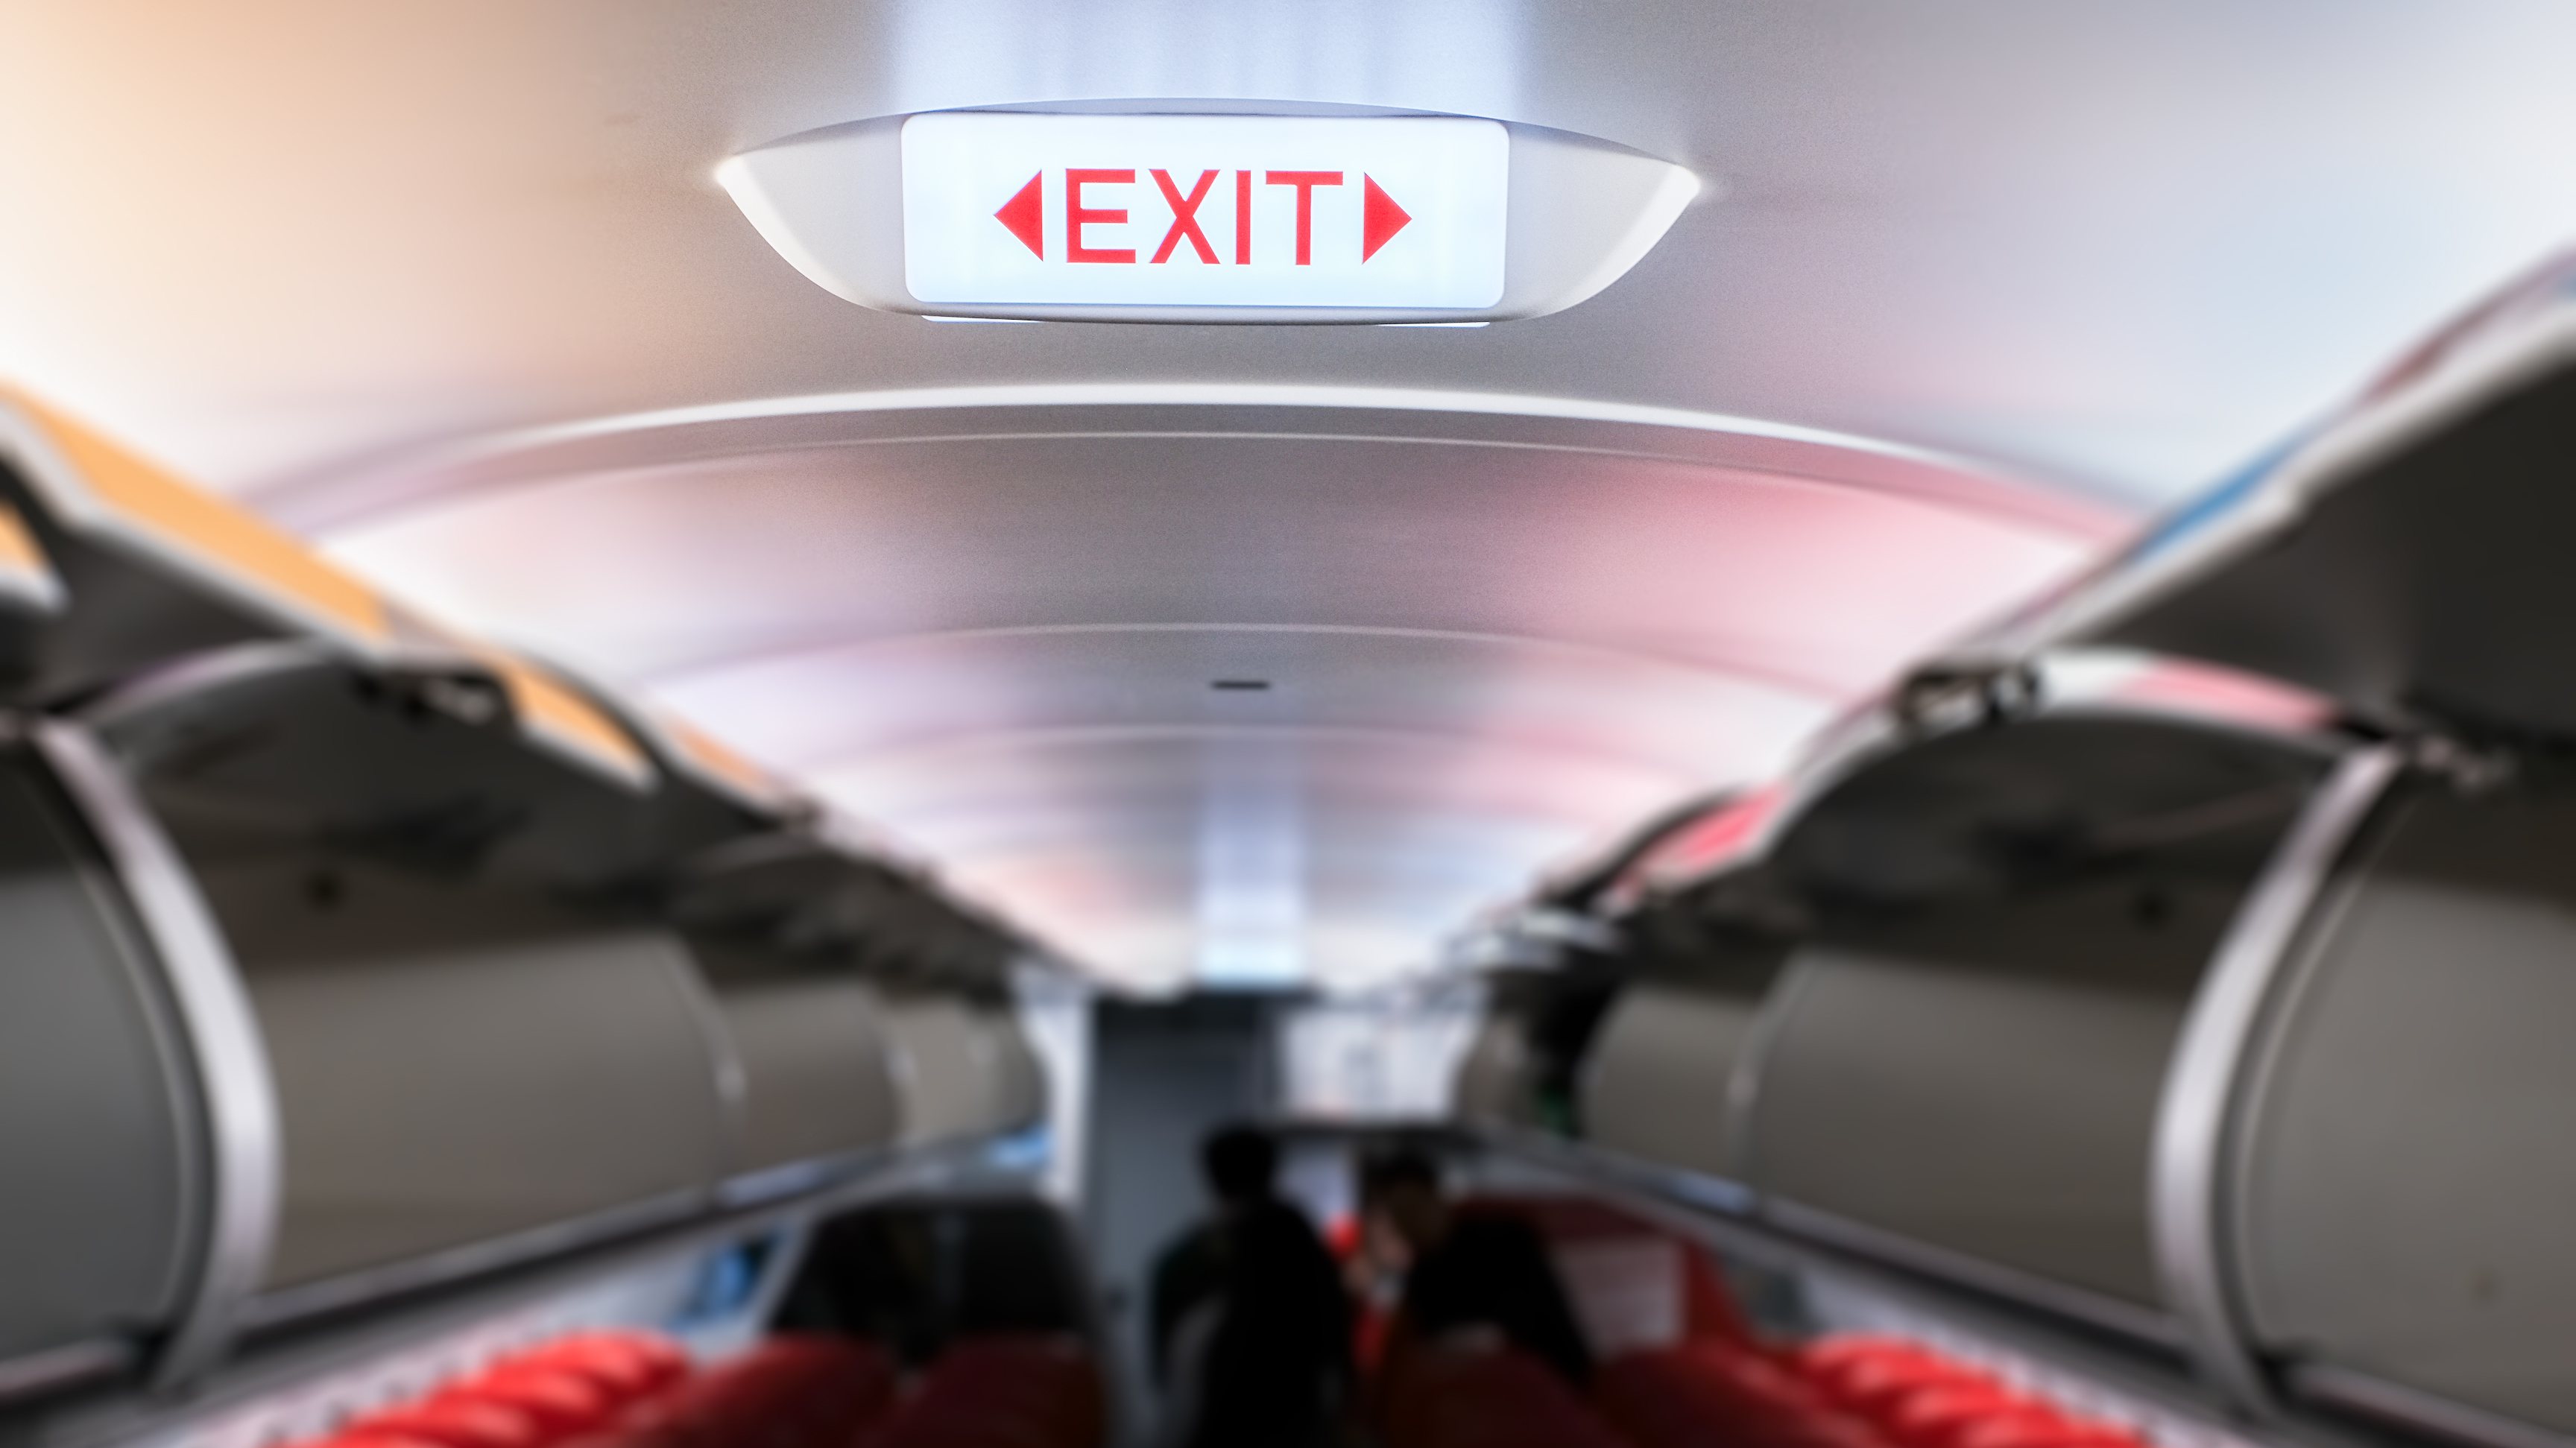 Emergency exit sign on ceiling inside passenger aircraft cabin